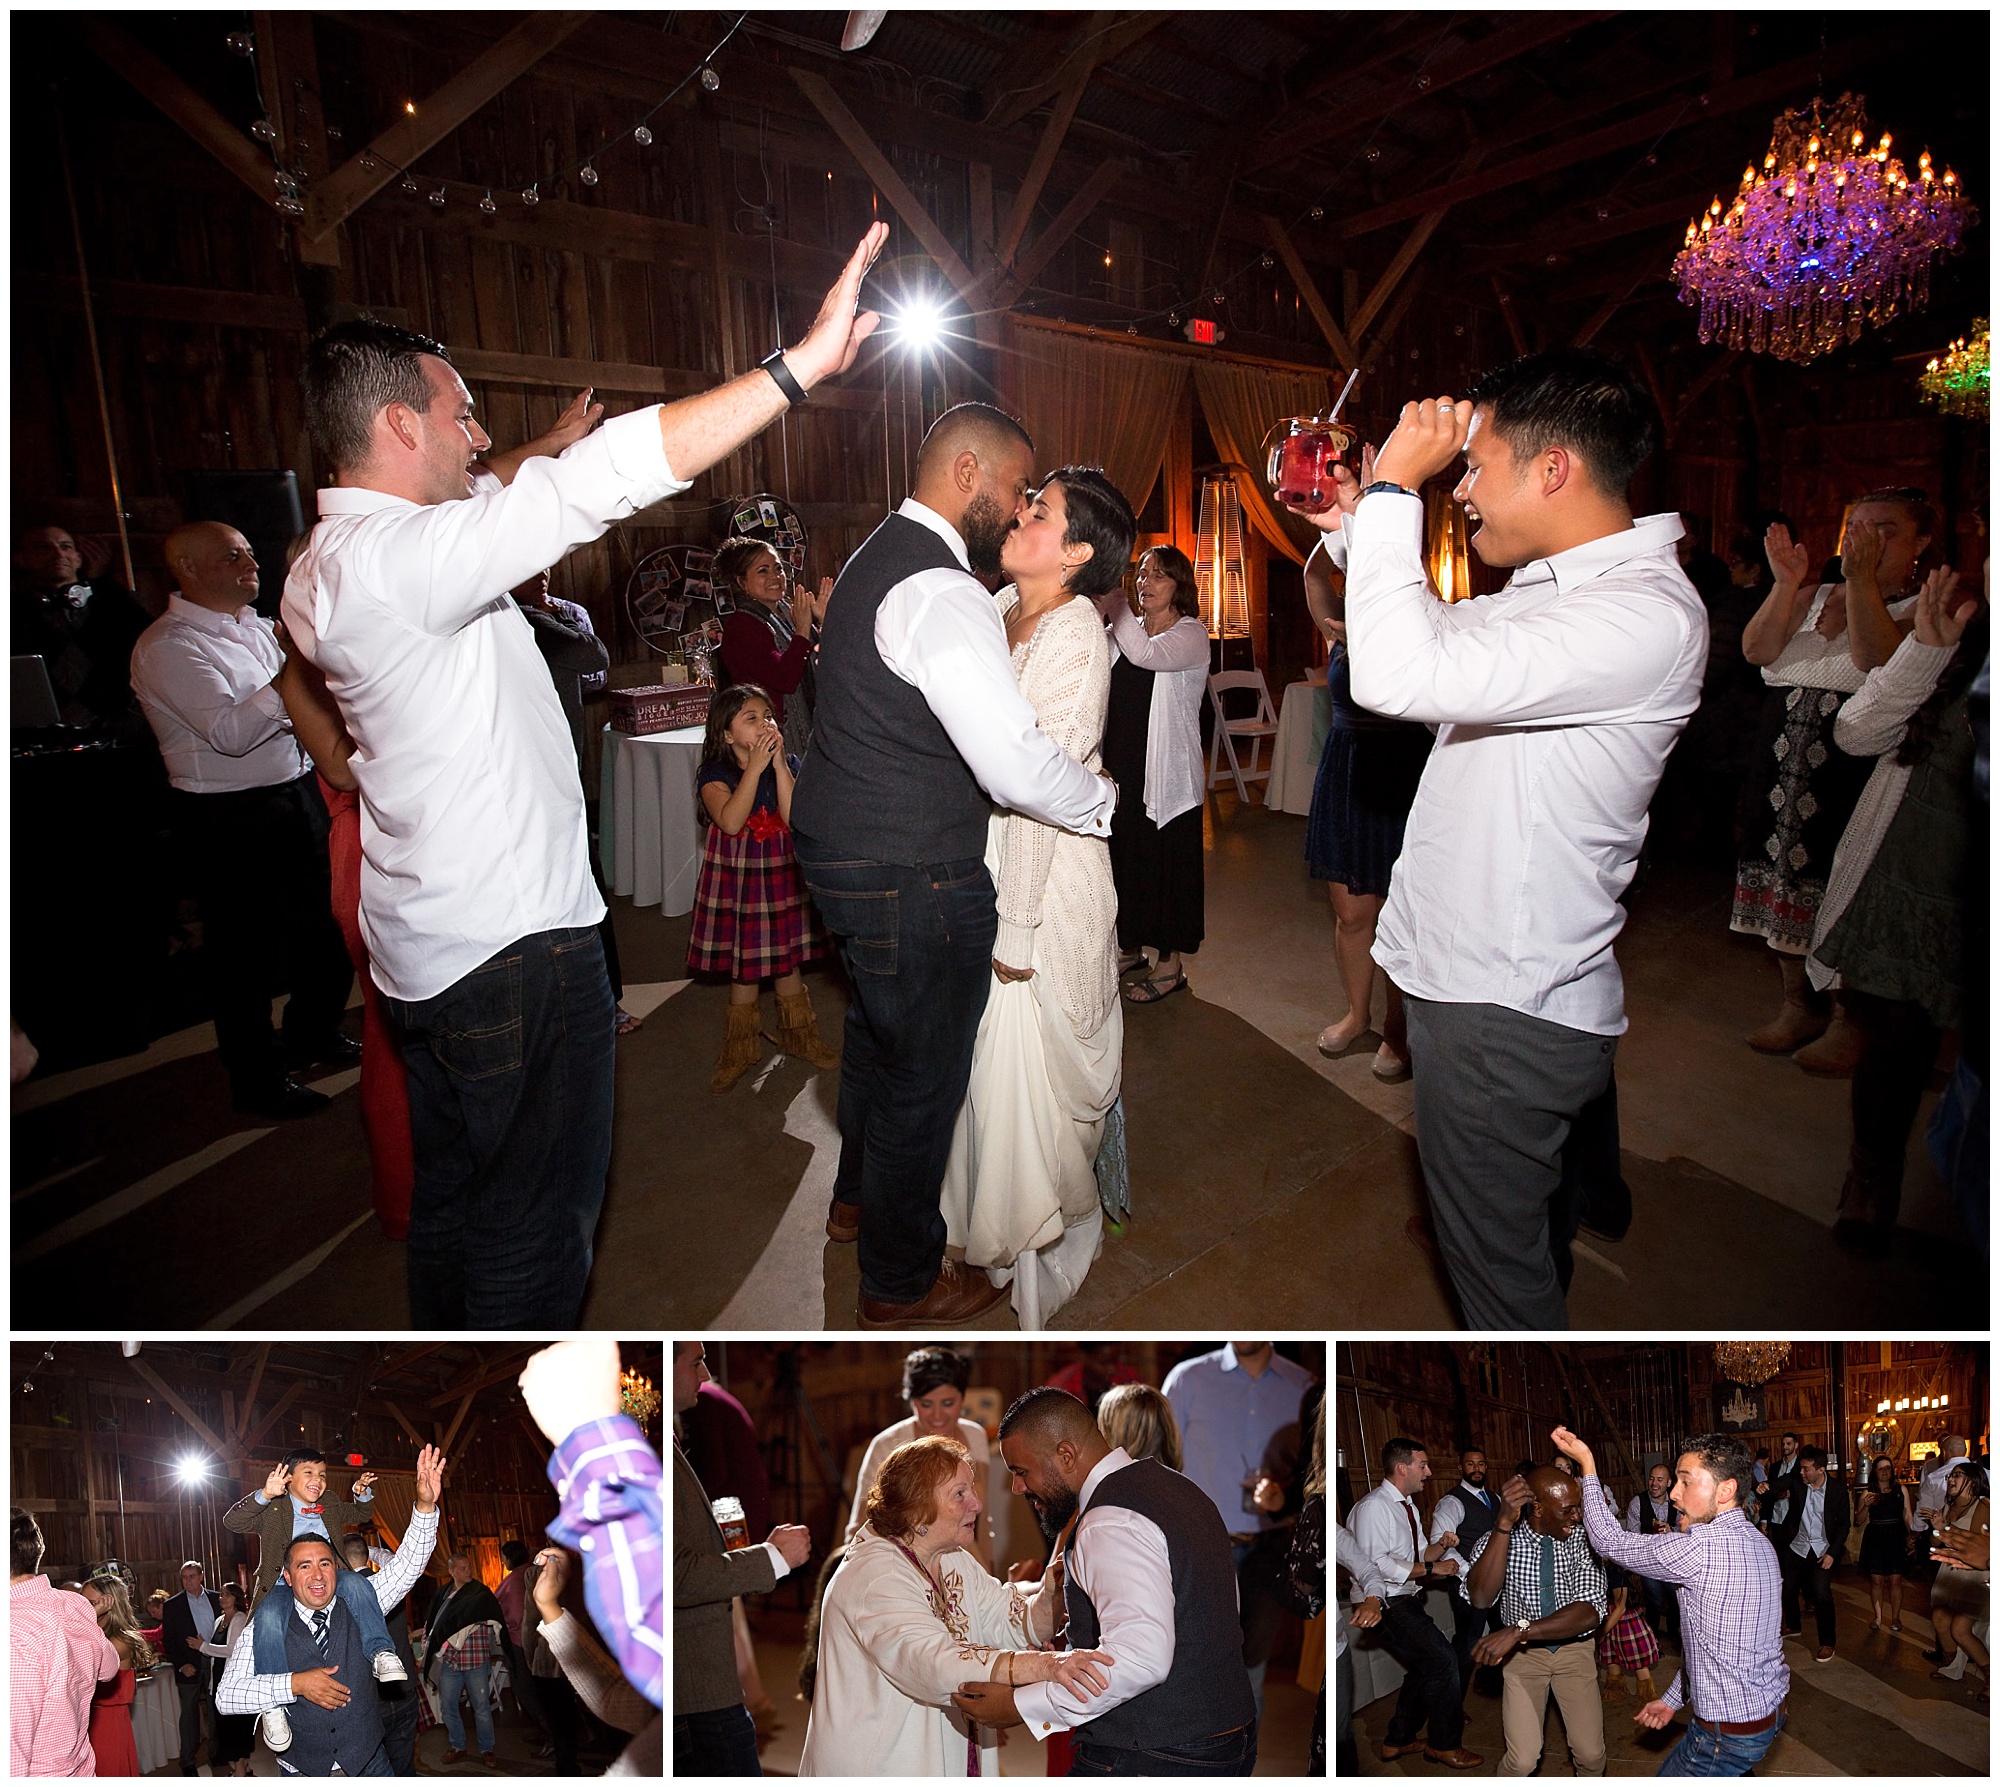 Photos of dancing and fun at the wedding reception.